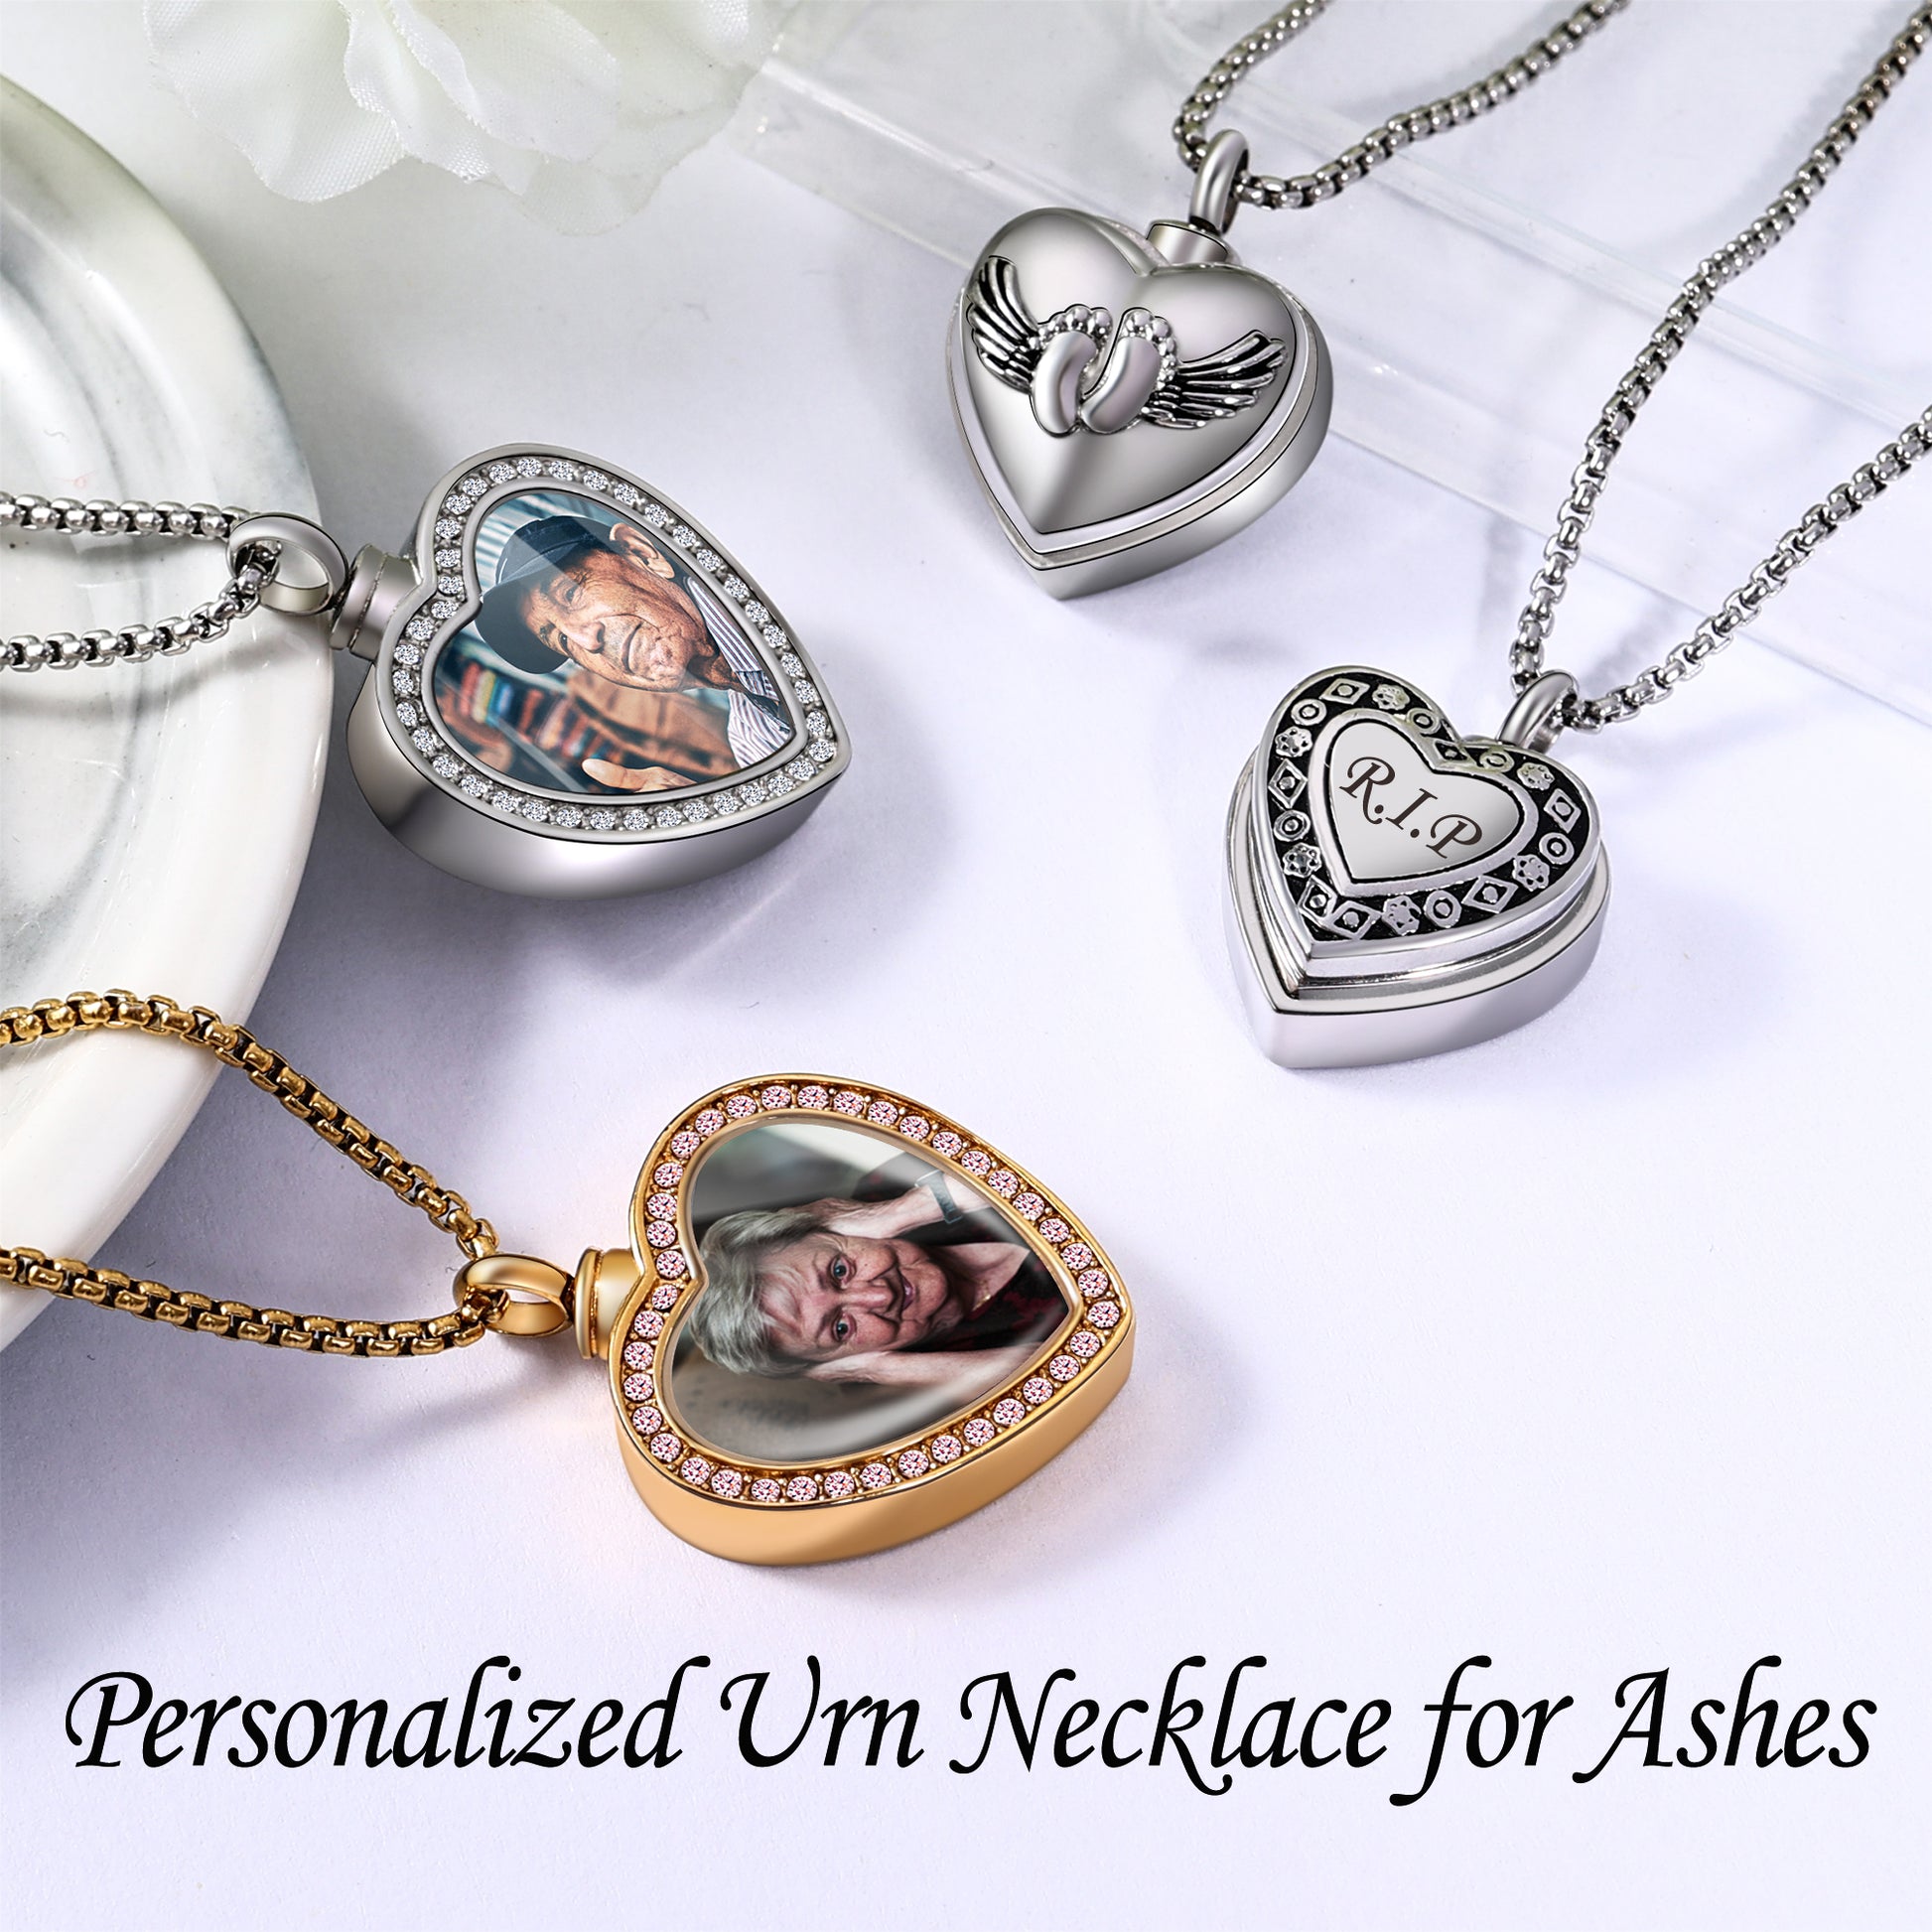 urns and necklaces for ashes